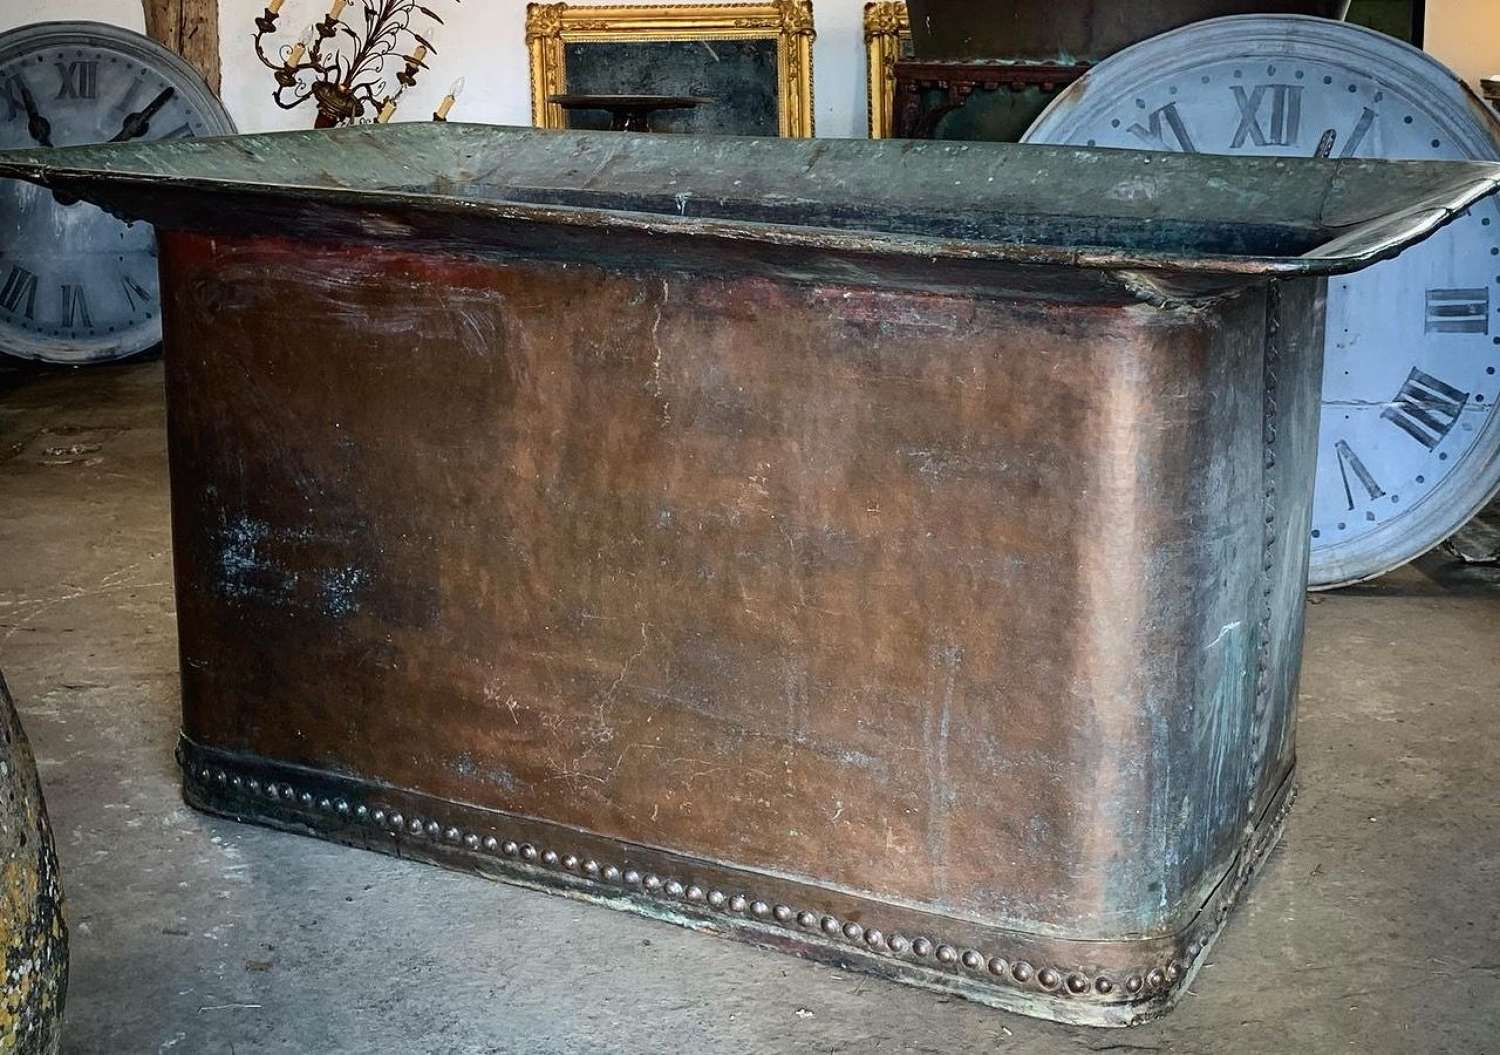 HUGE 19TH CENTURY RIVETED COPPER TANK